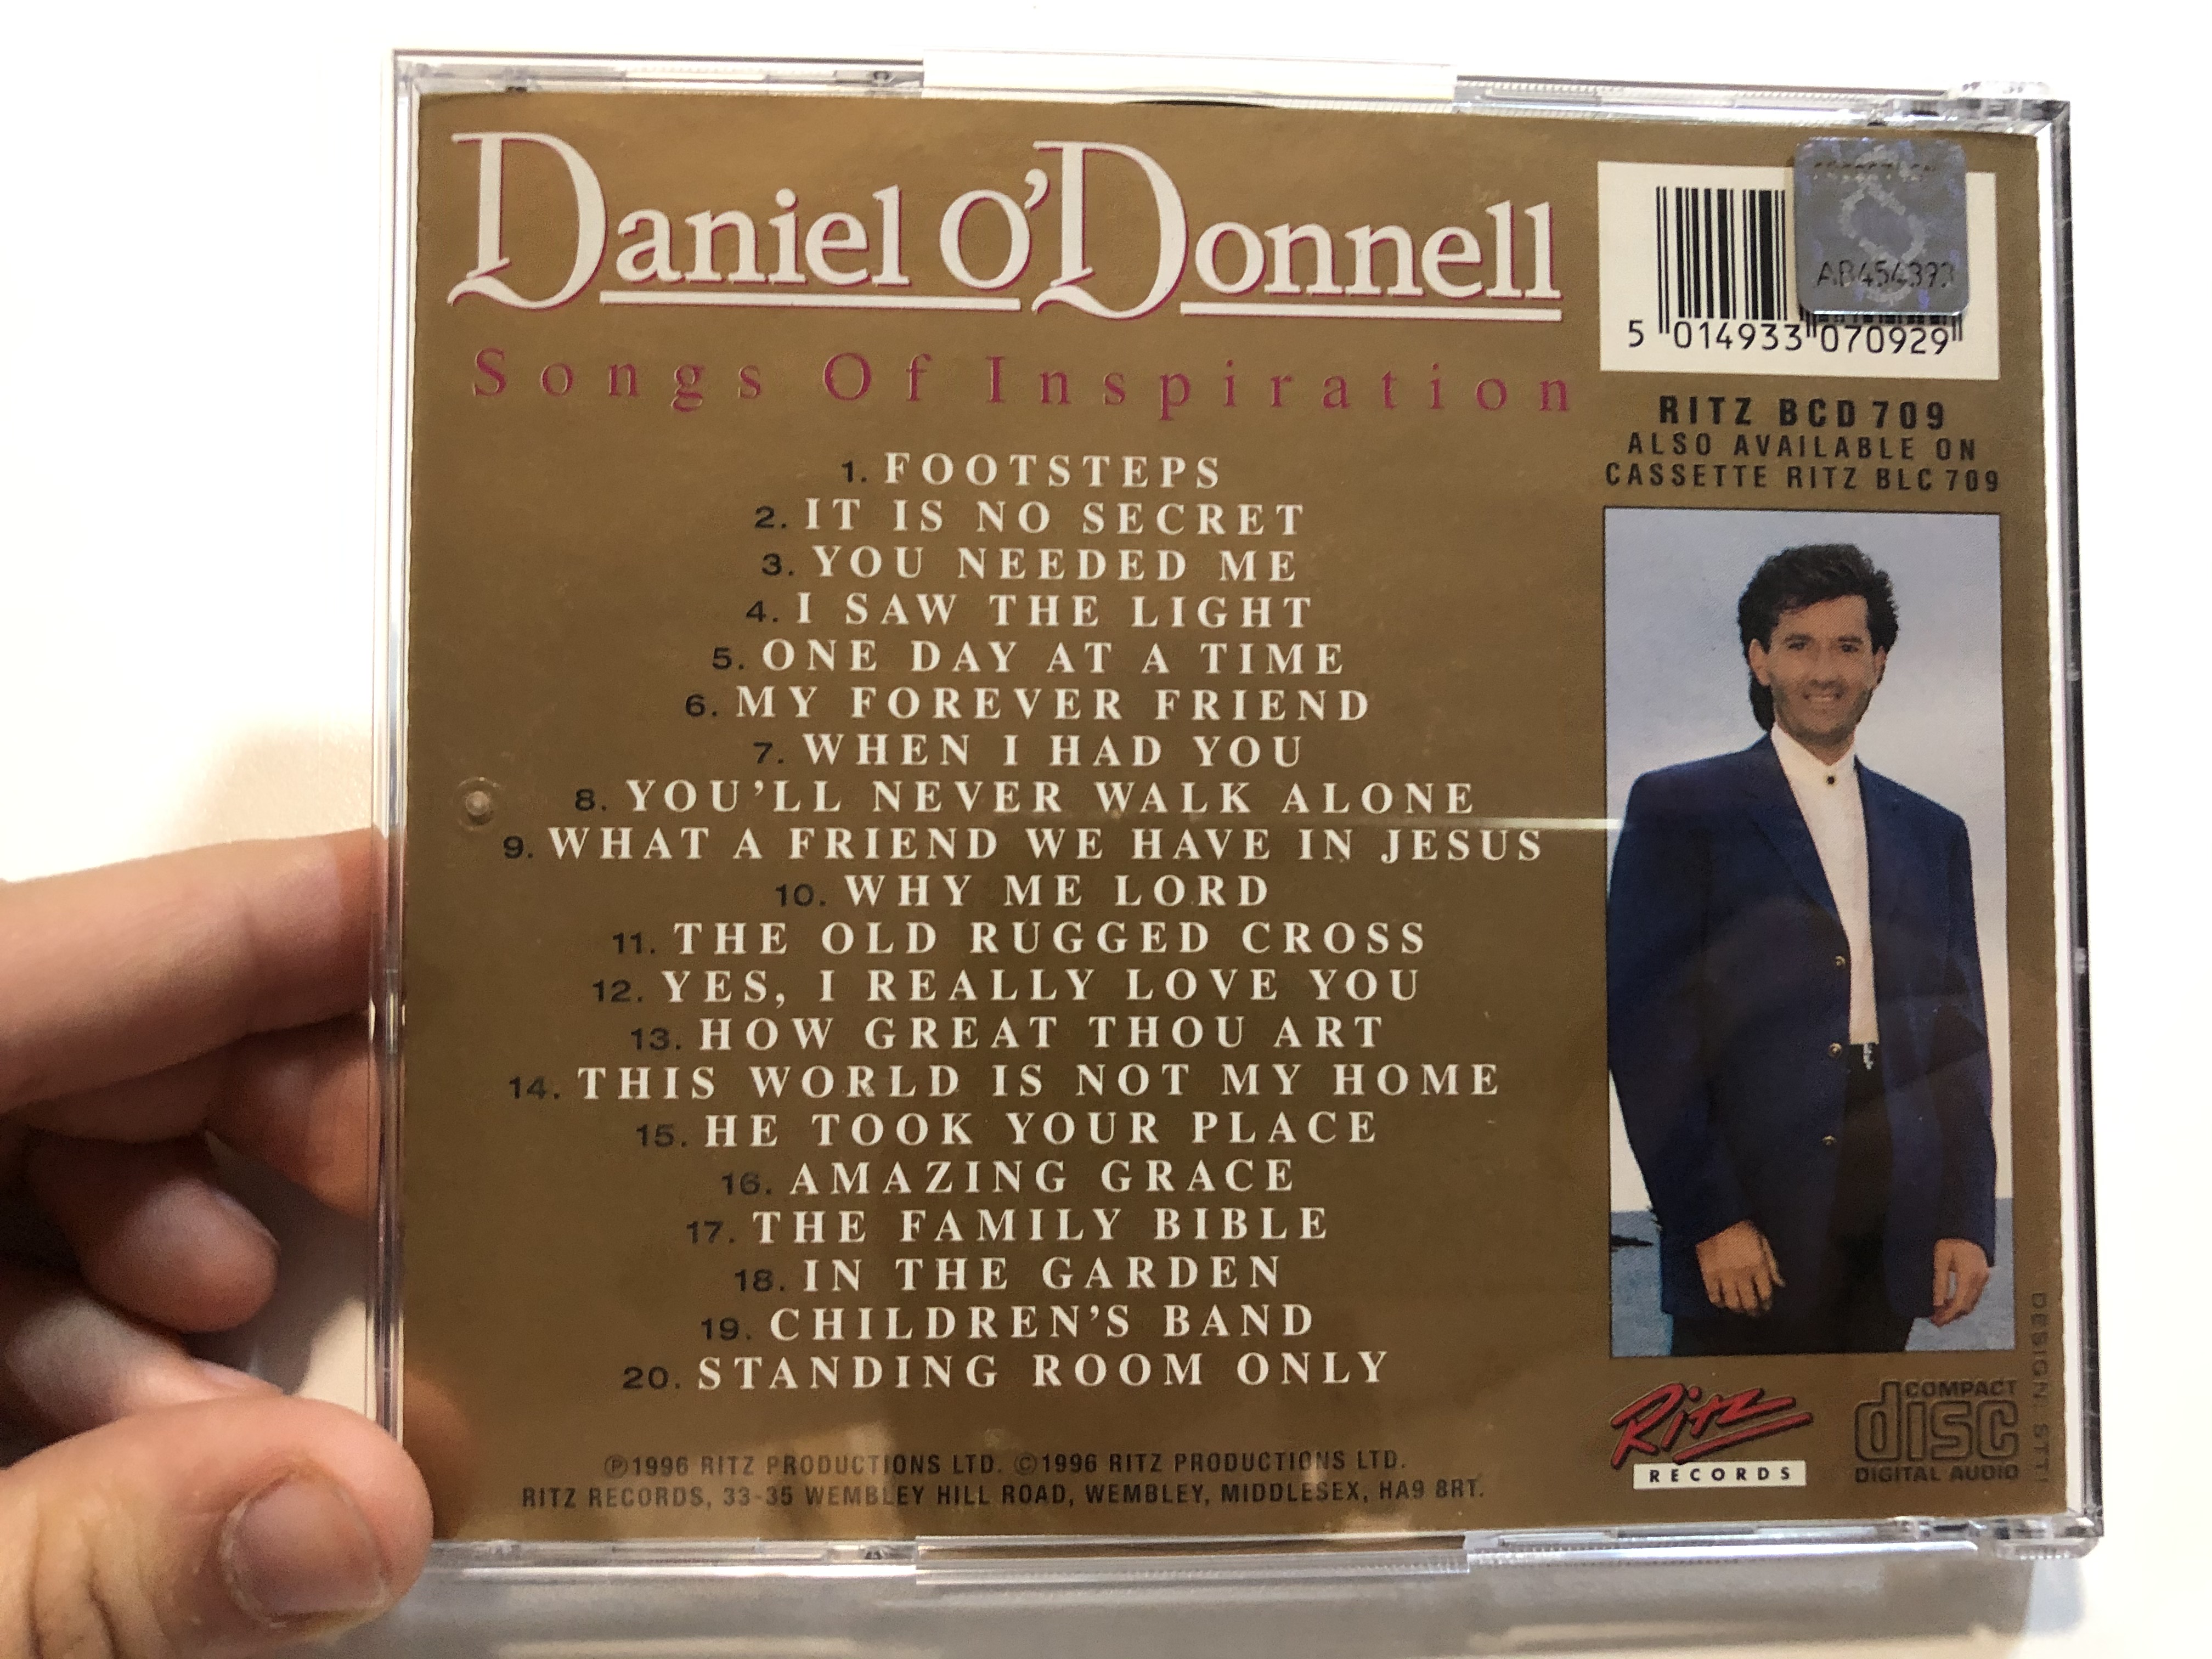 songs-of-inspiration-daniel-o-donnell-20-tracks-featuring-footsteps-my-forever-friend-why-me-lord-amazing-grace-it-is-no-secret-how-great-thou-art-ritz-records-audio-cd-1996-ritz-8-.jpg